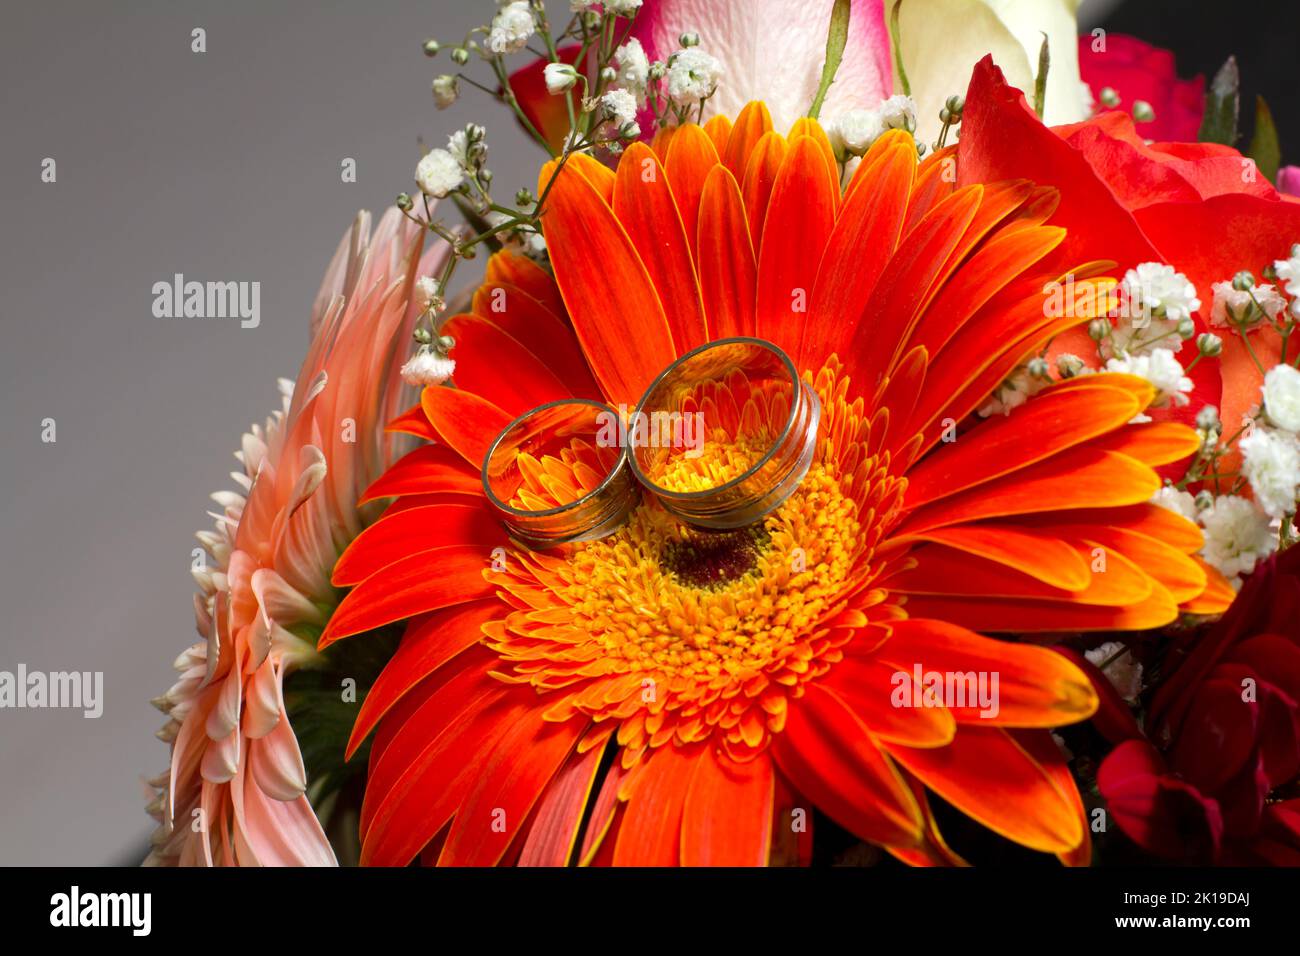 Wedding  rings and red rose Stock Photo